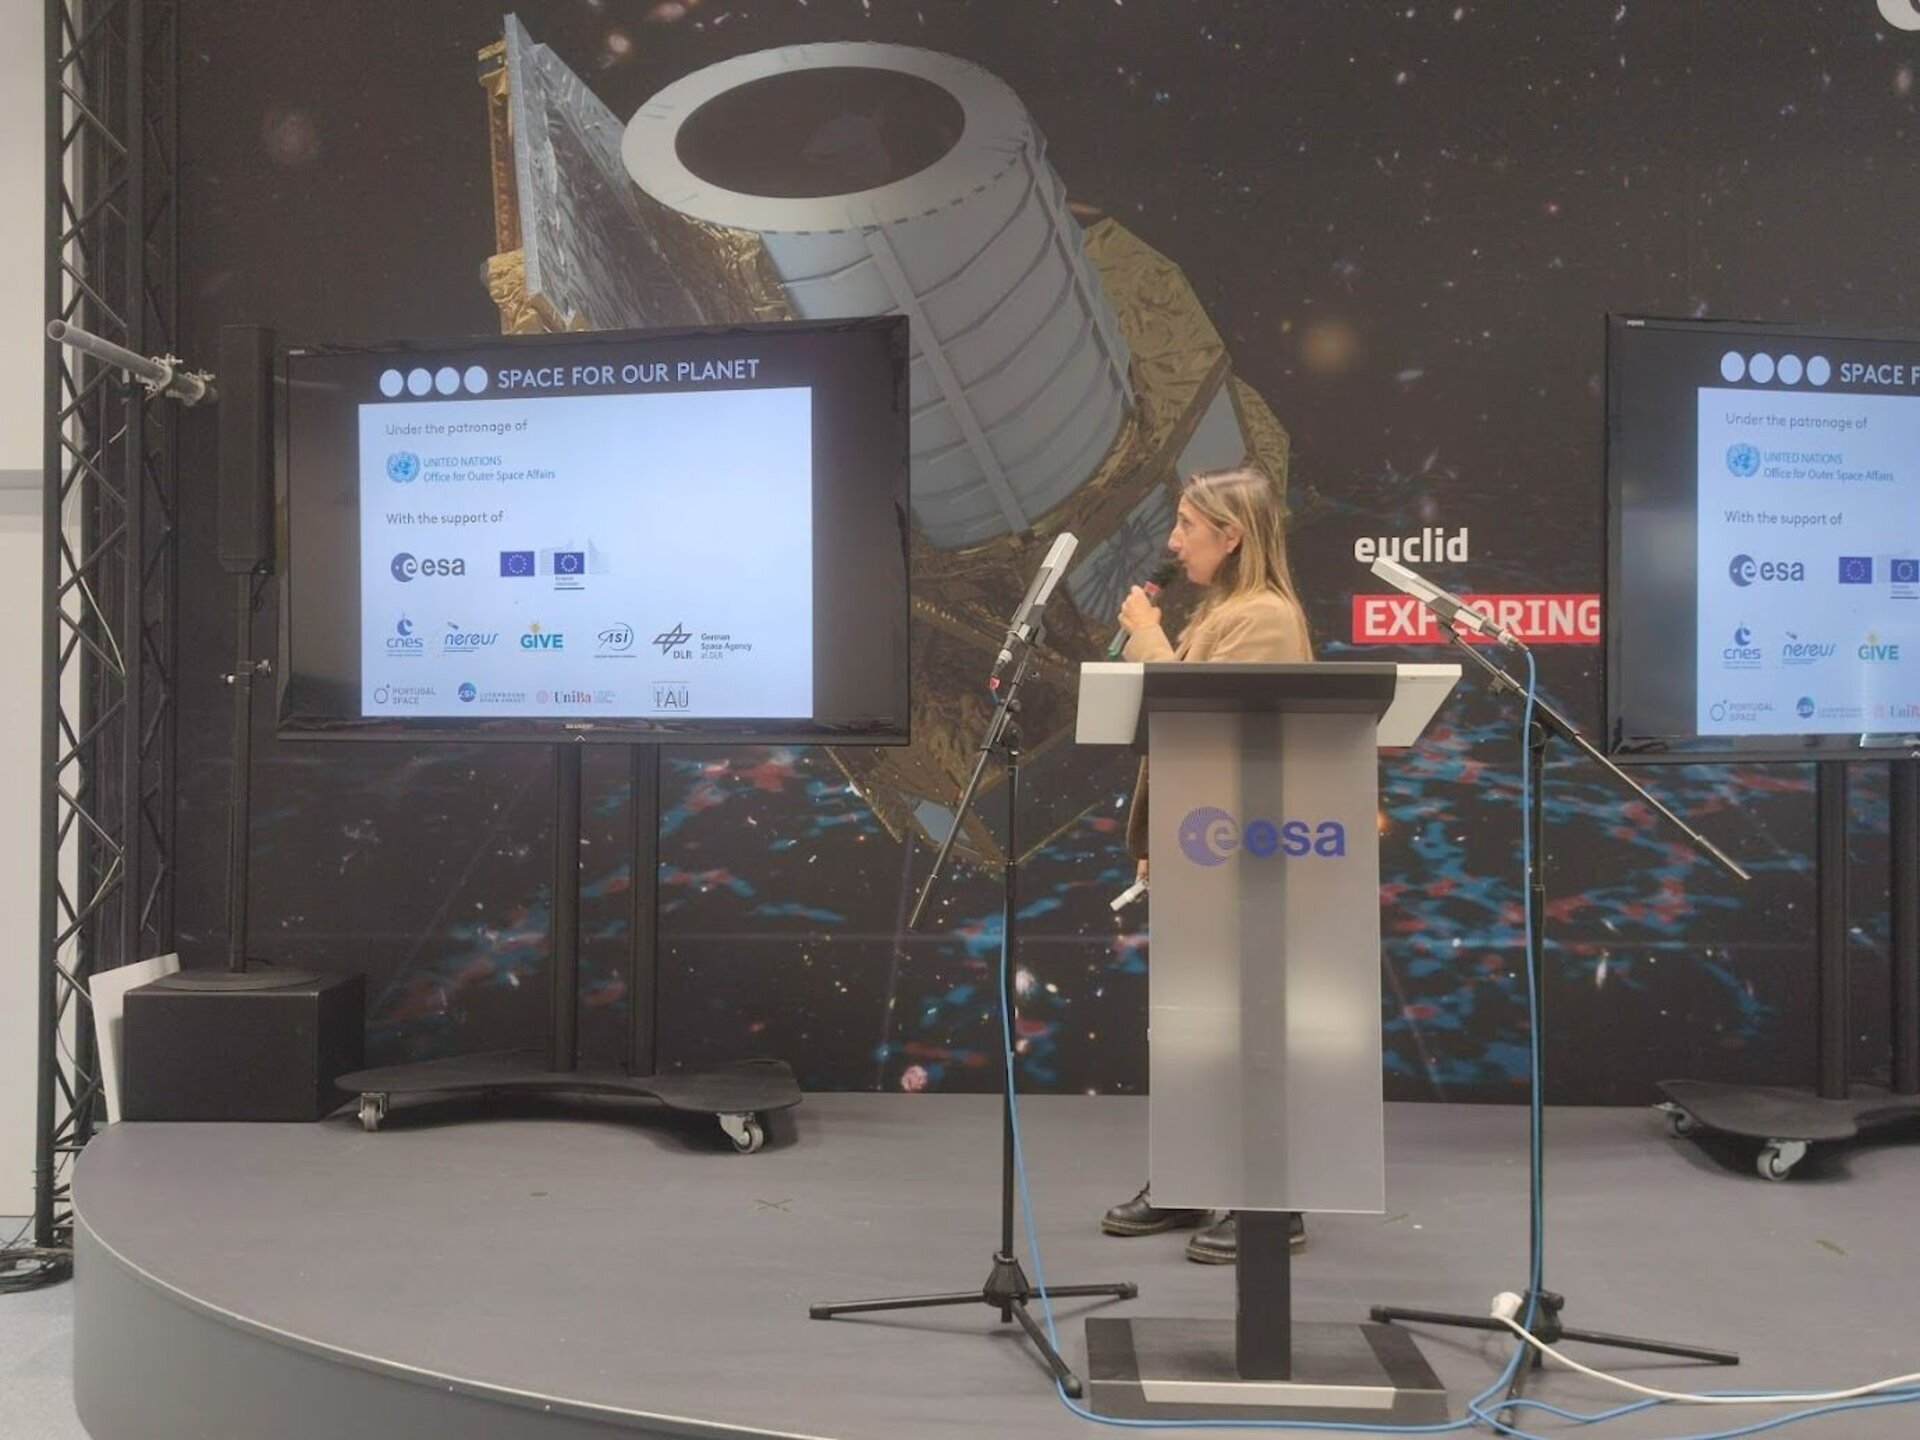 During the Ecsite Space Group Annual Meeting 2023, Fiorella Coliolo shared insights on Space for Our Planet, a travelling exhibition that is moving around the world to showcase how space technology and its applications benefit life on Earth and all humankind.  